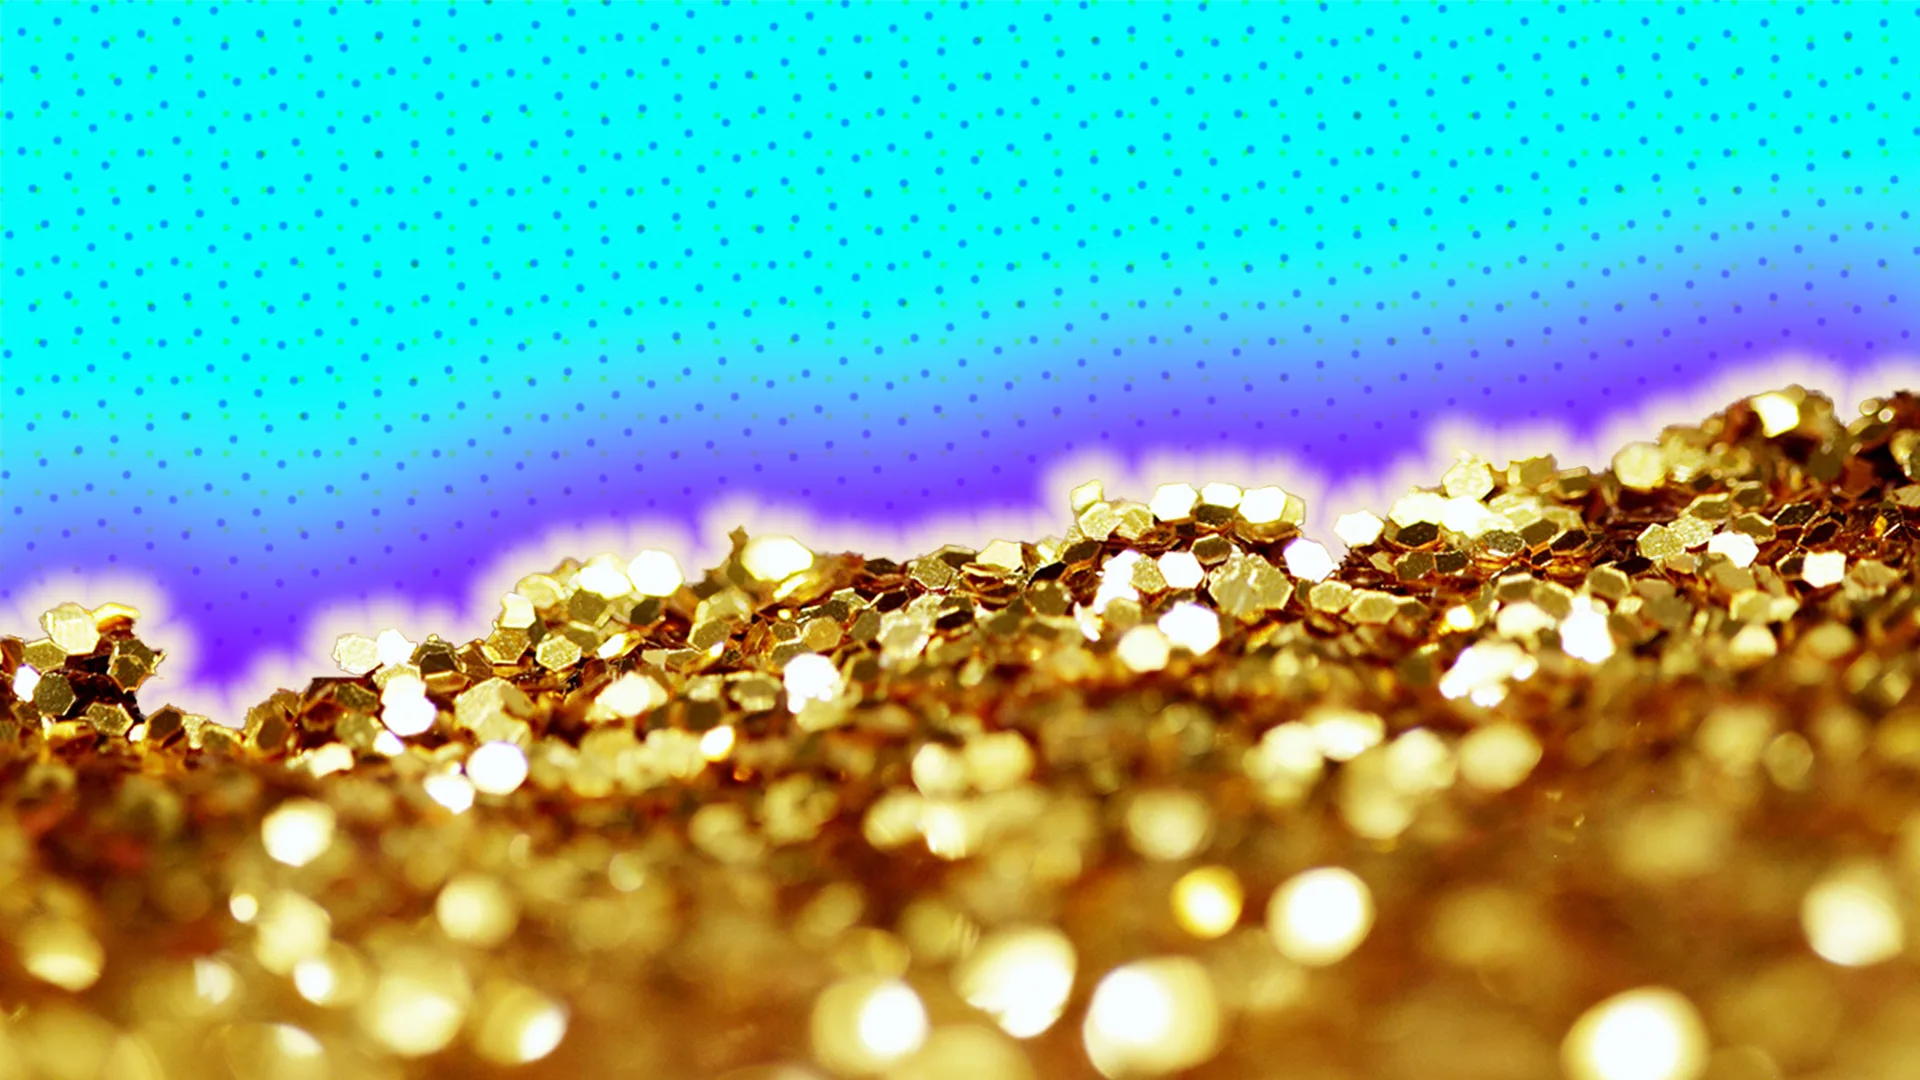 Pieces of glittering gold with a turquoise textured background outlined by a purple halo effect